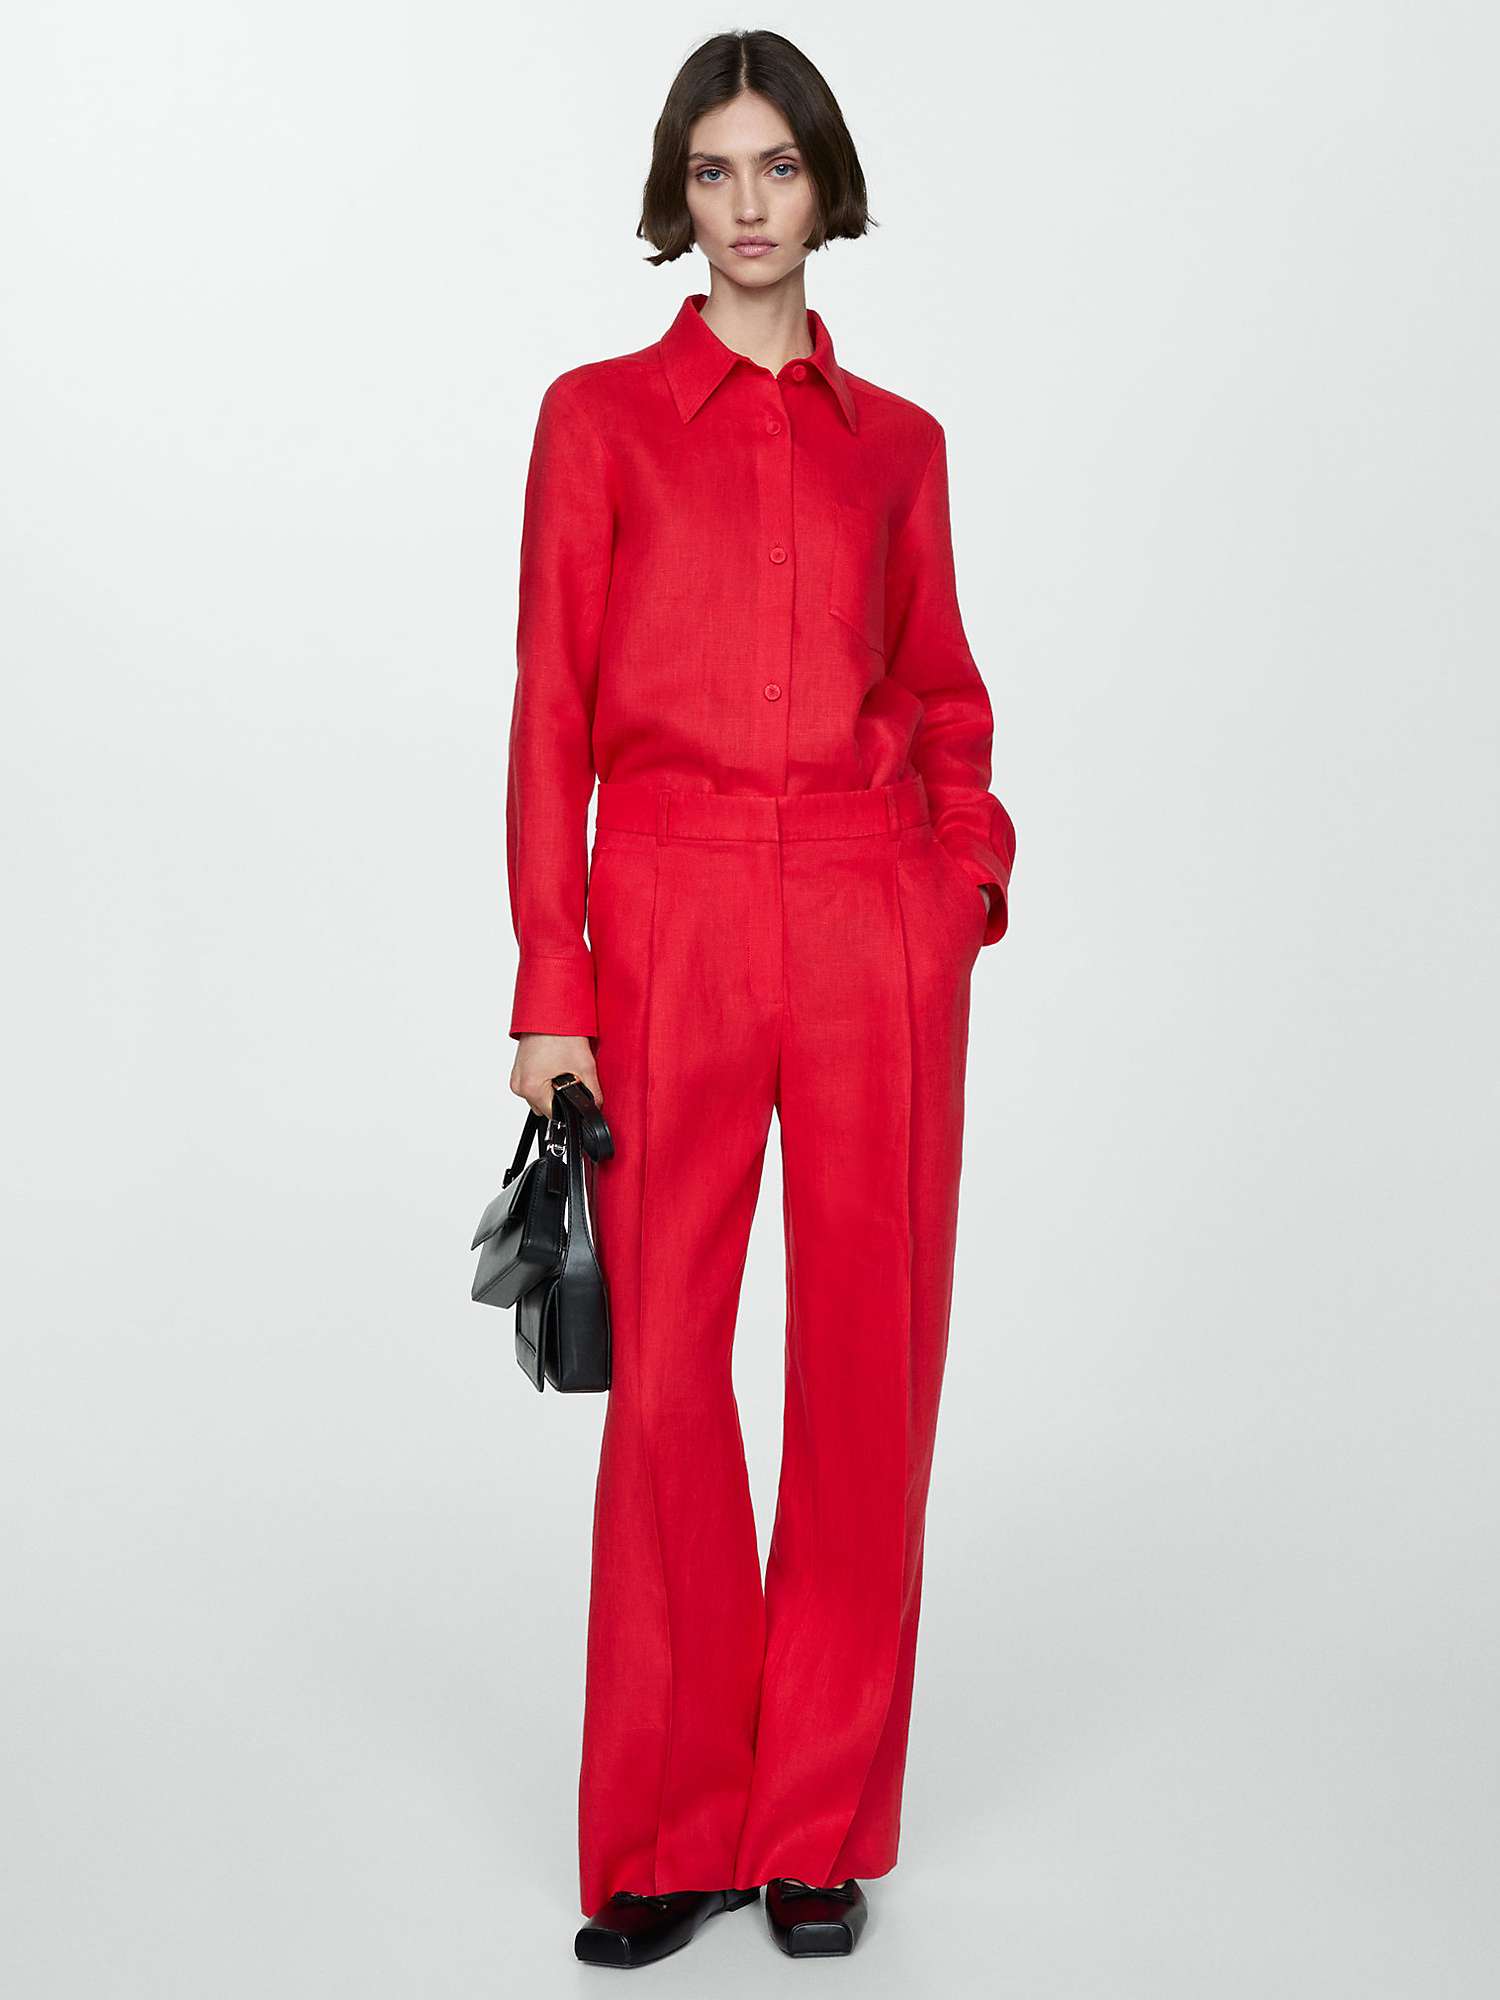 Buy Mango Linen Straight Leg Trousers, Bright Red Online at johnlewis.com